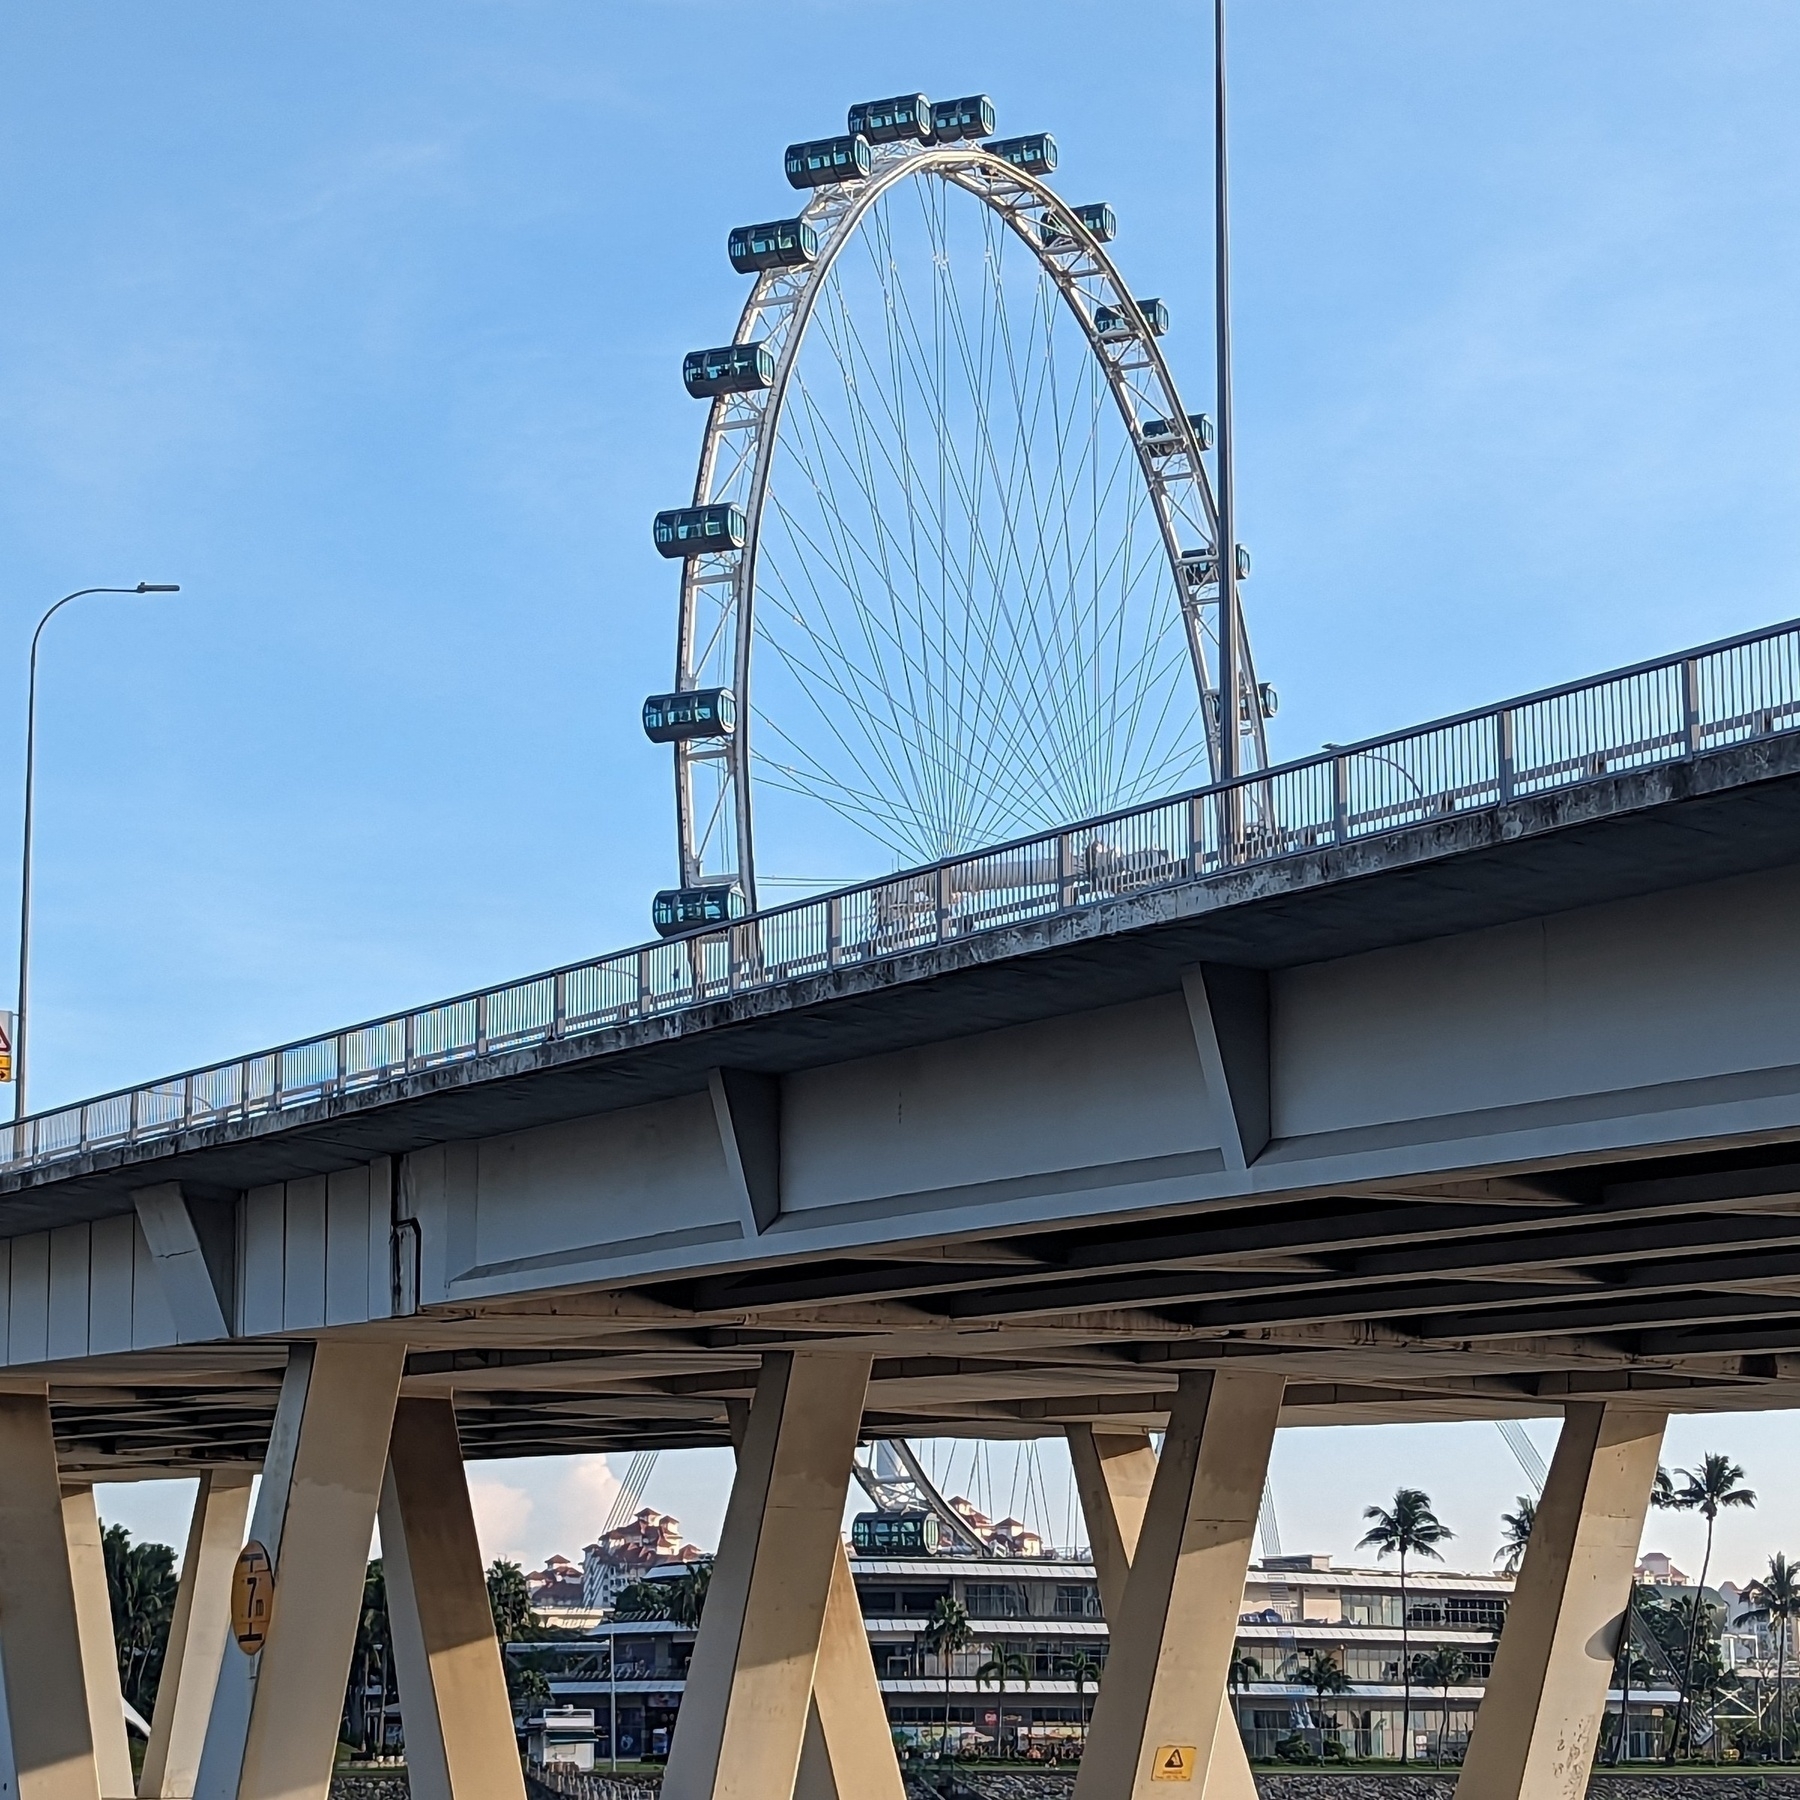 Singapore Flyer behind a road bridge with support piers shaped like a V.